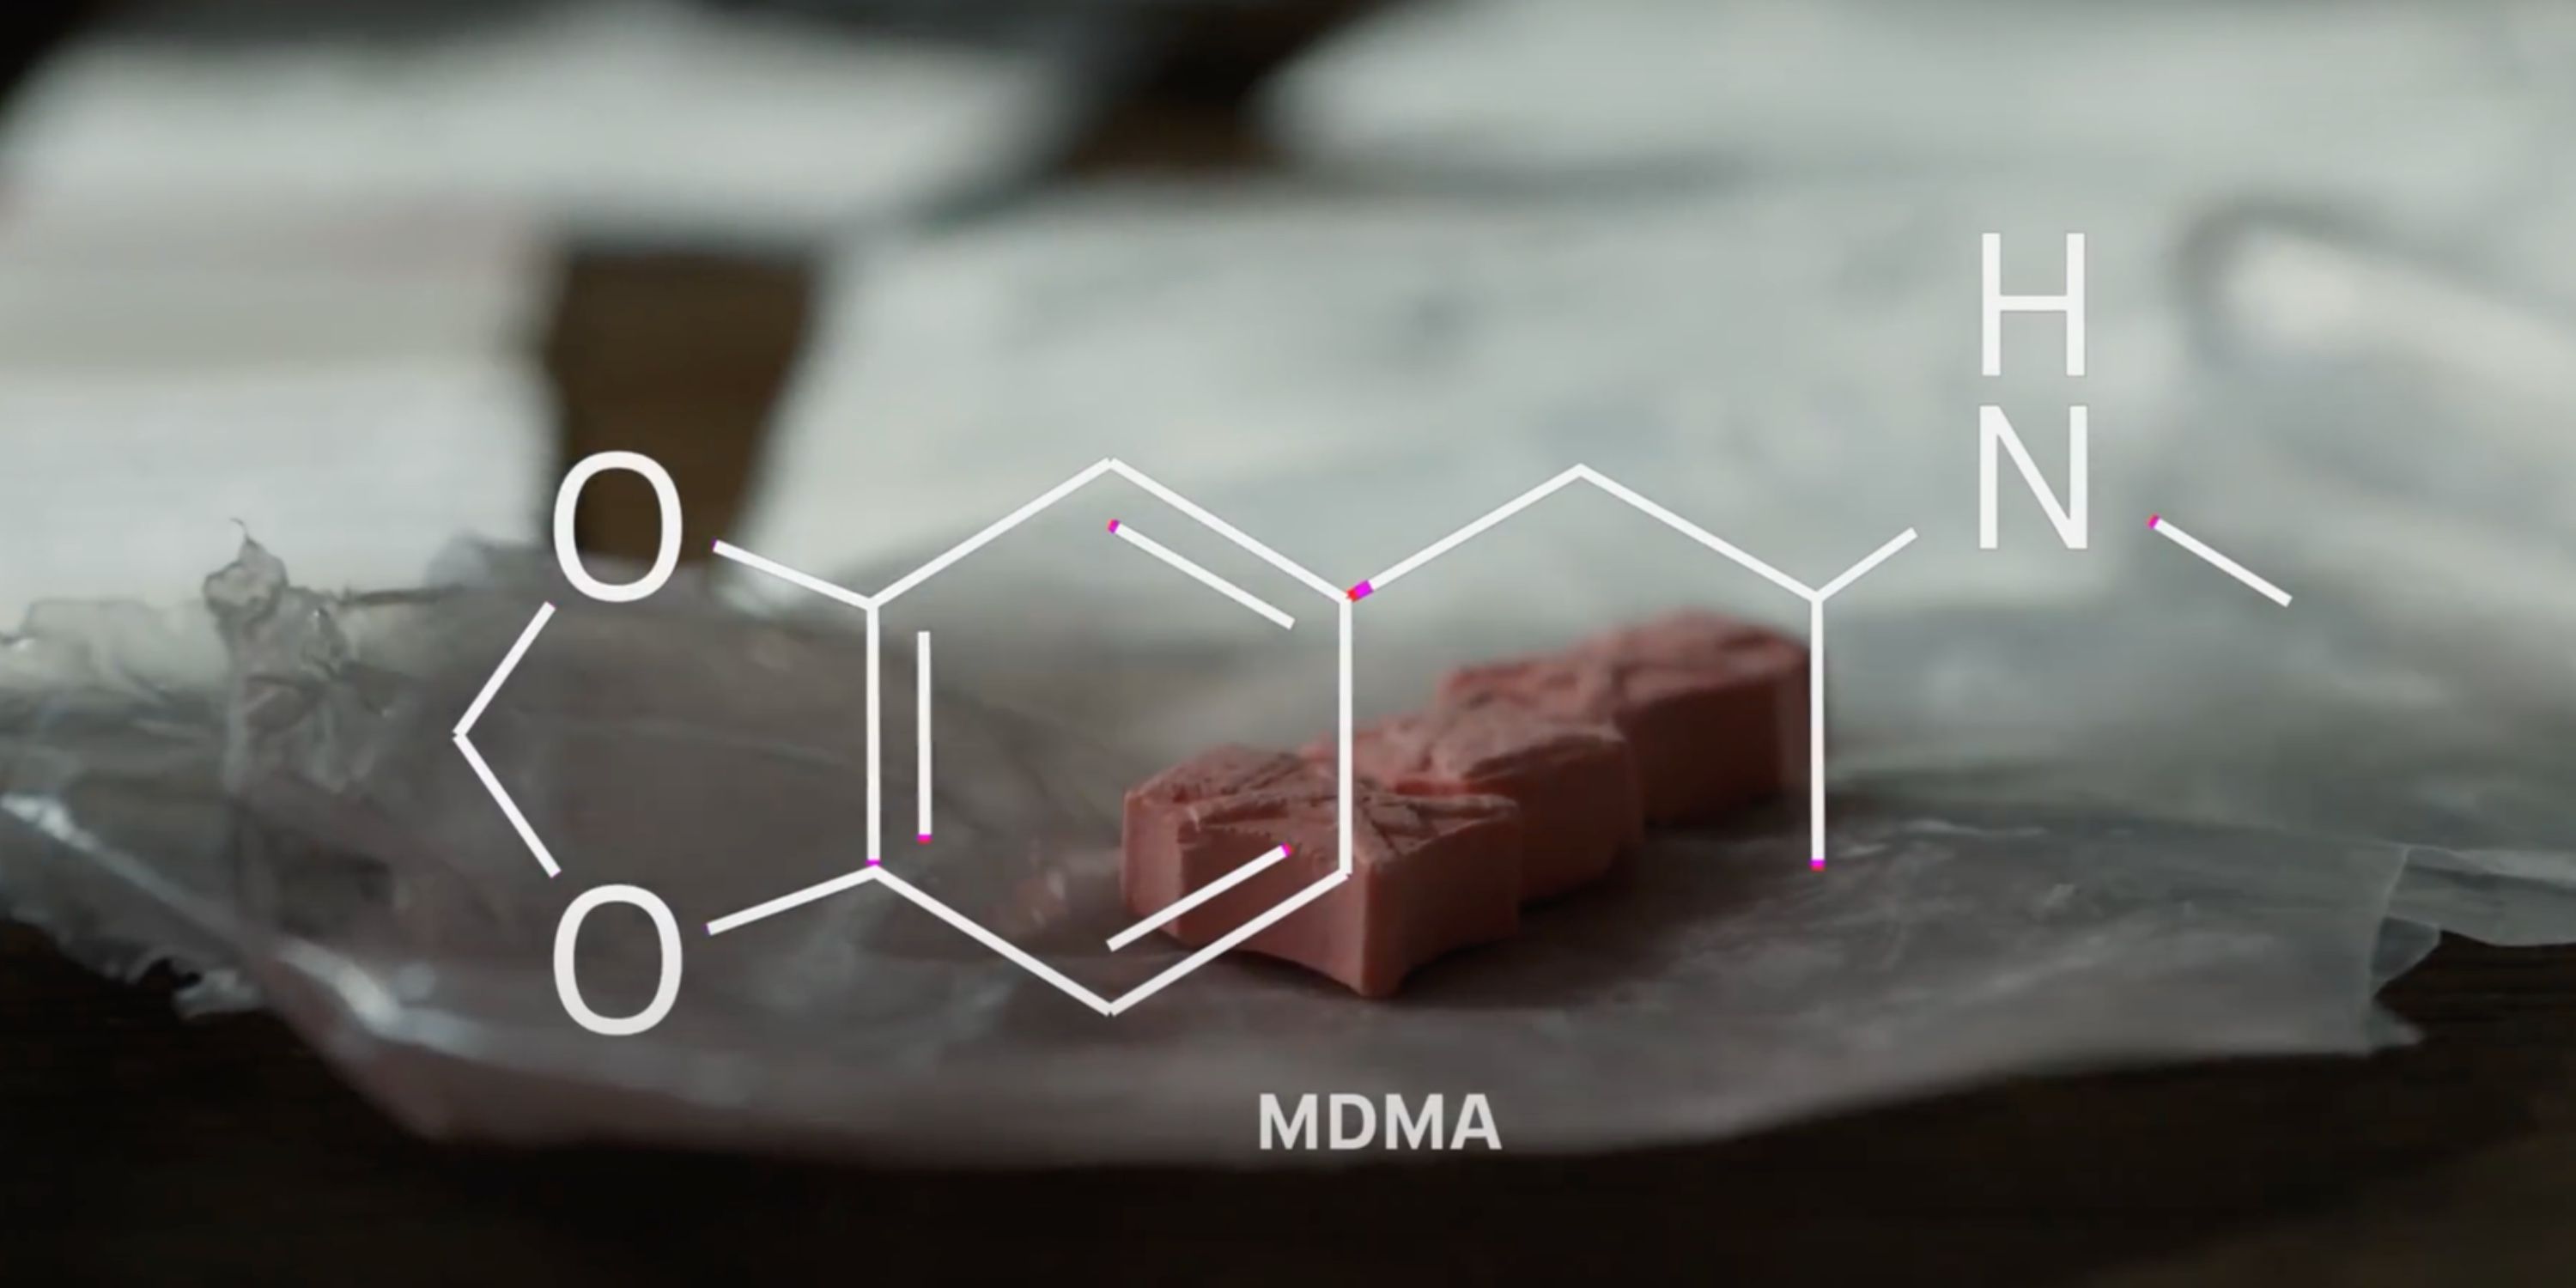 MDMA in The Business of Drugs on Netflix